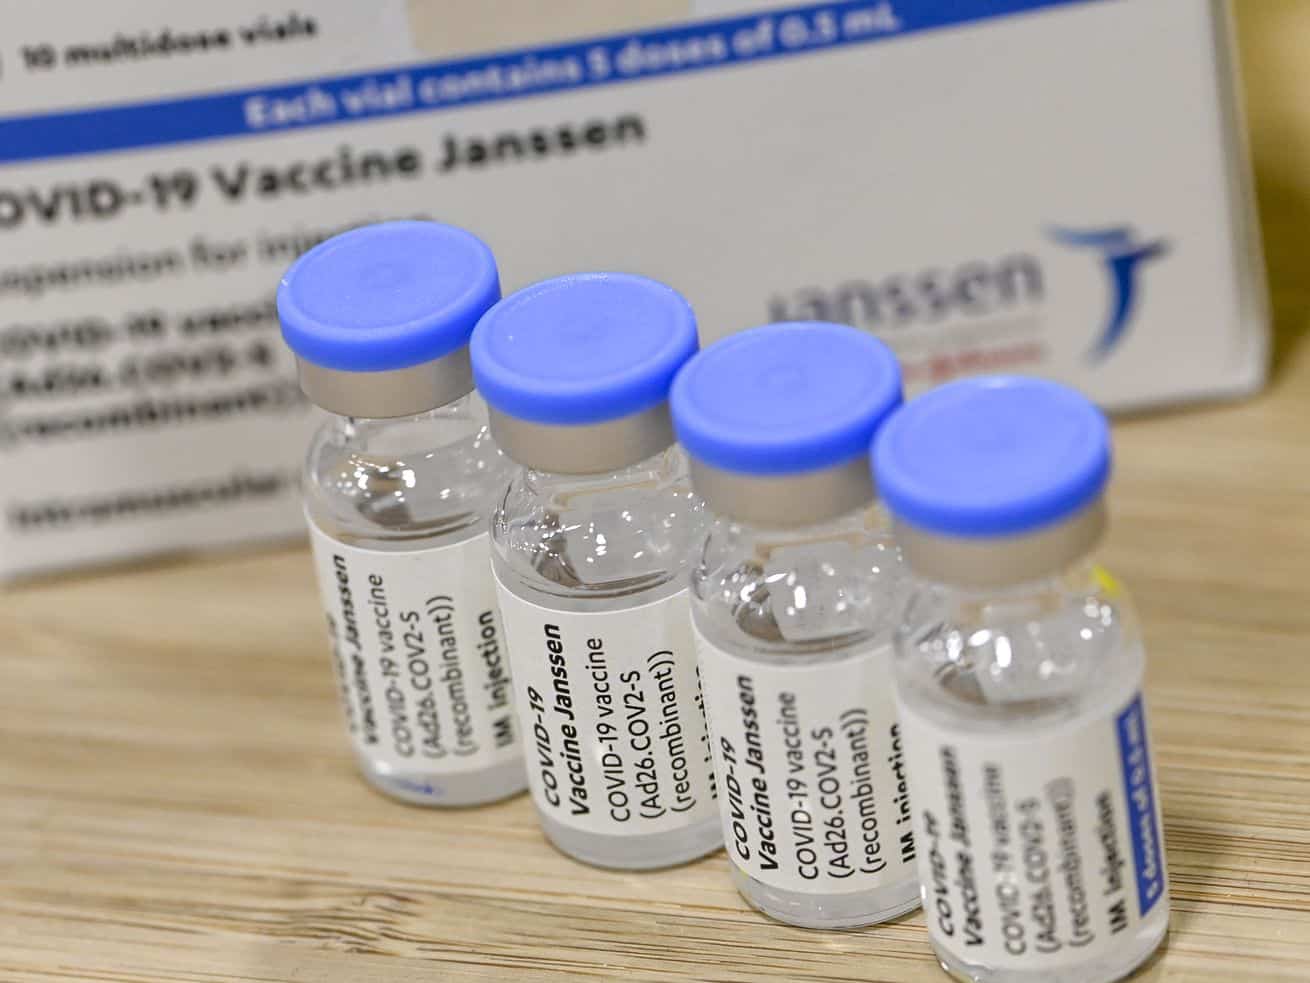 The J&J vaccine isn’t causing nausea and fainting, anxiety is